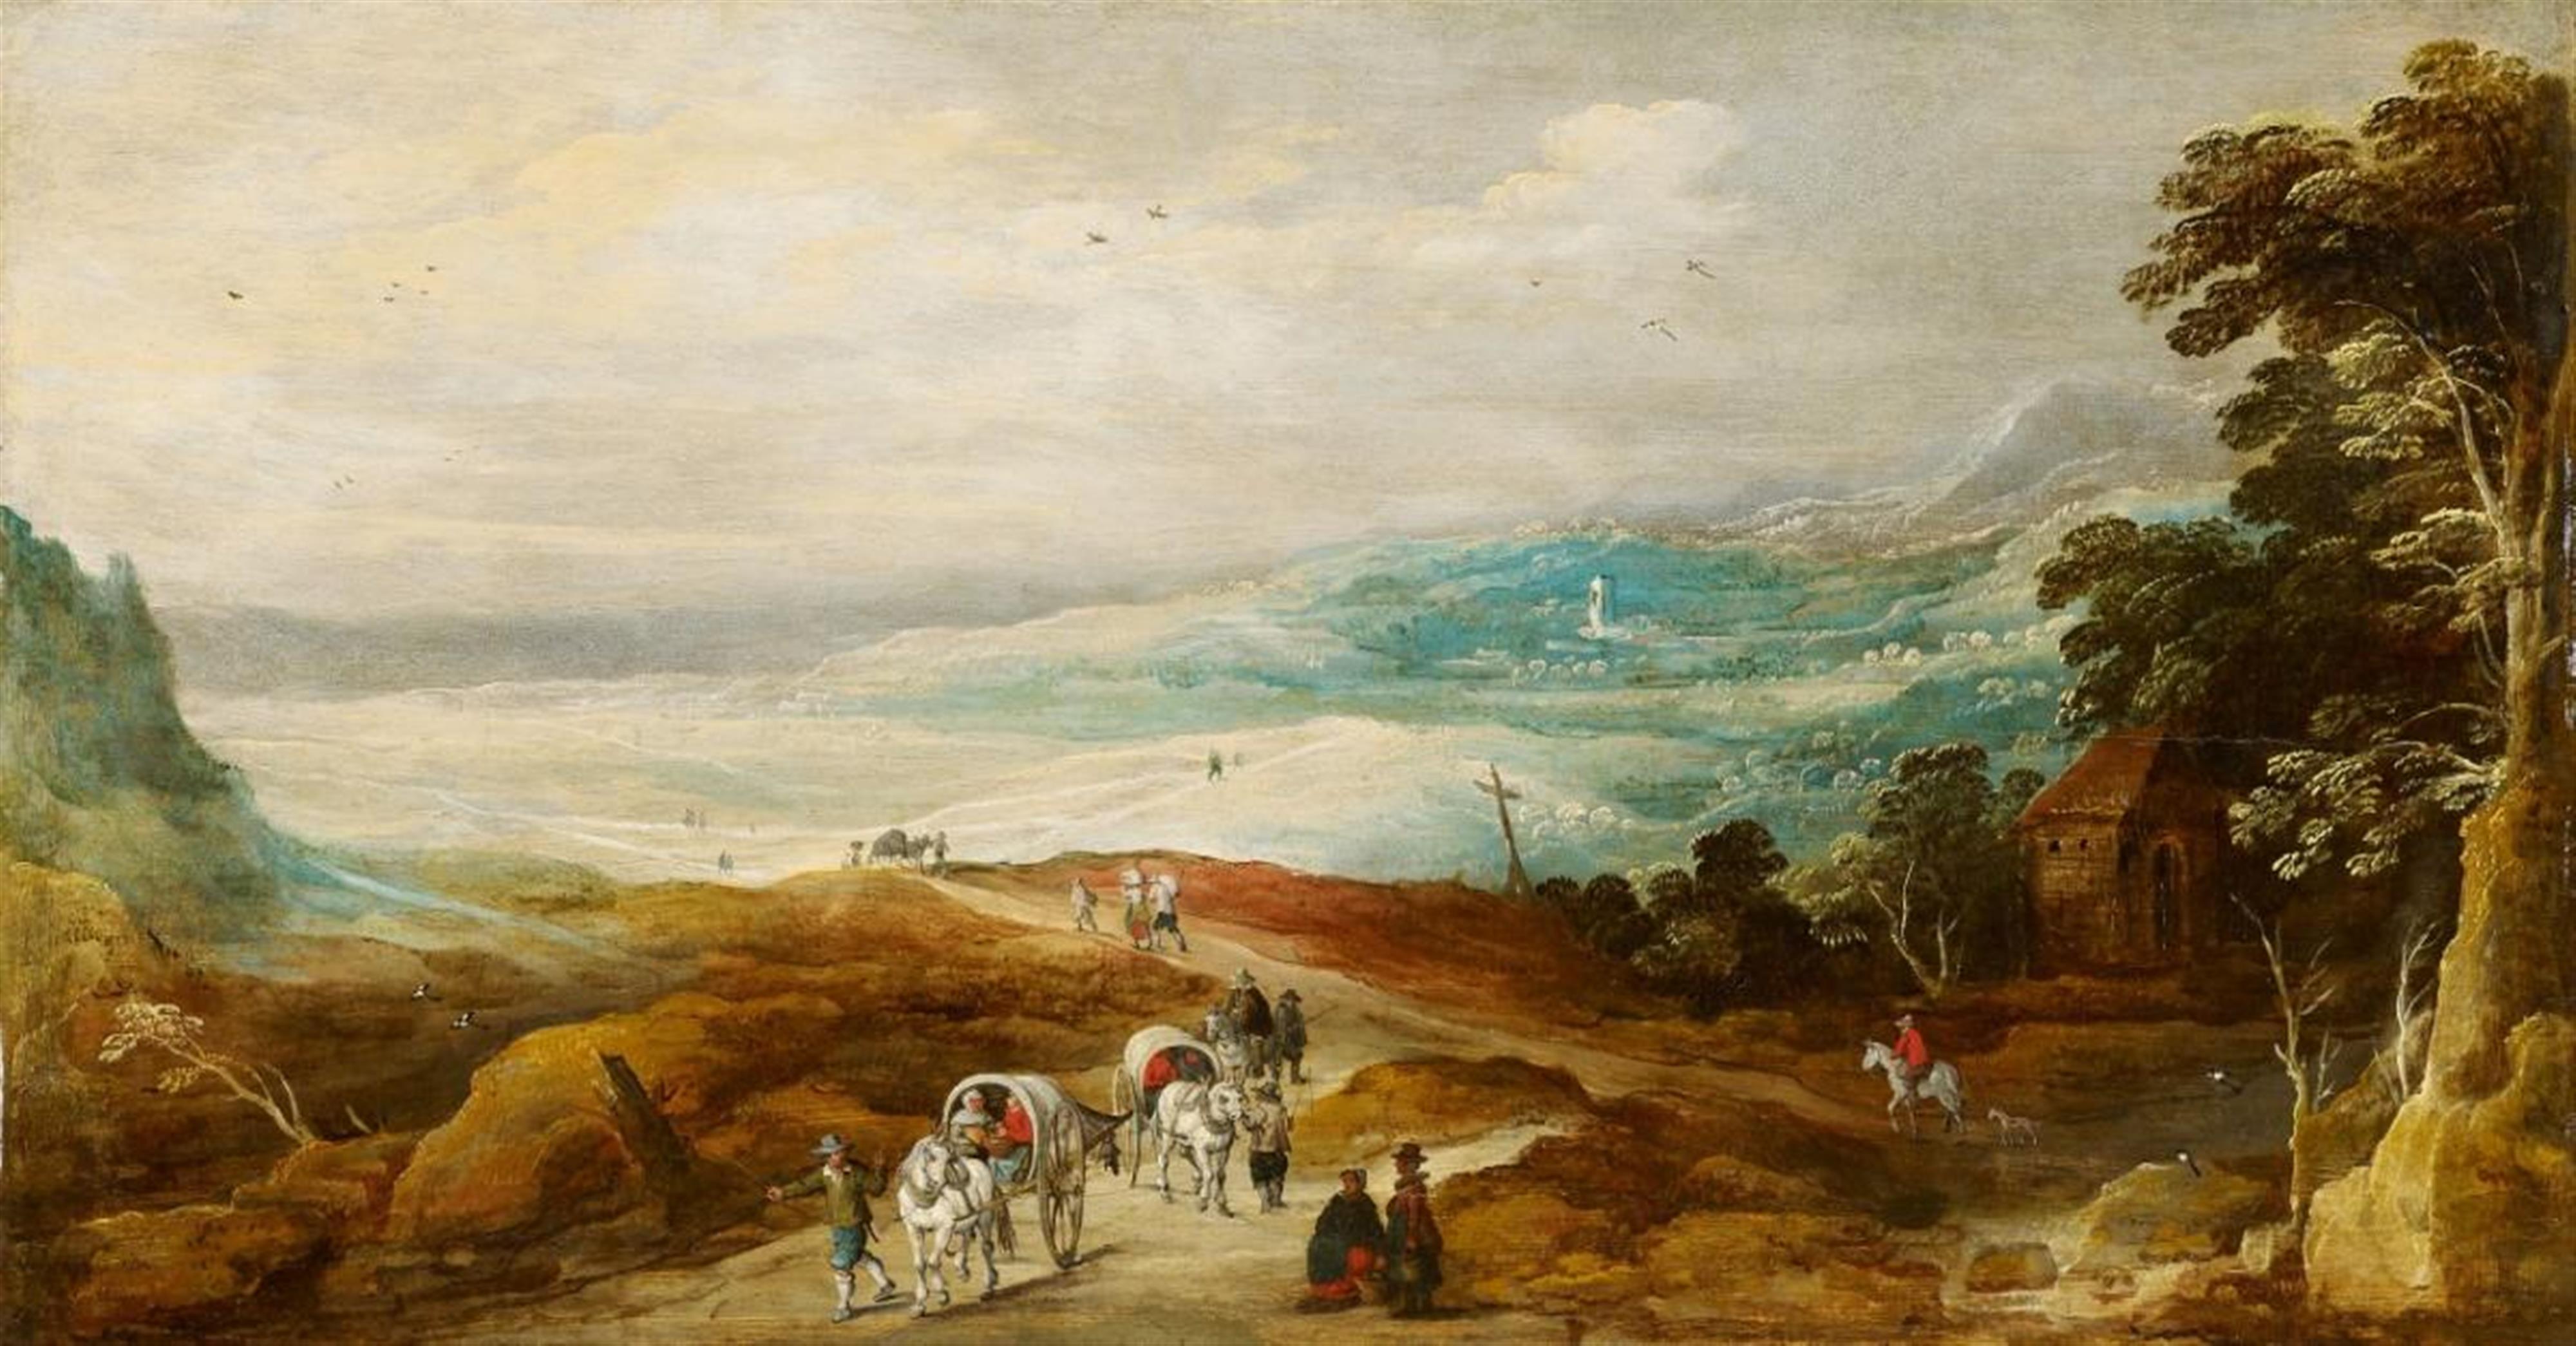 Joos de Momper - WIDE LANDSCAPE WITH TRAVELLERS AND WAGON - image-1